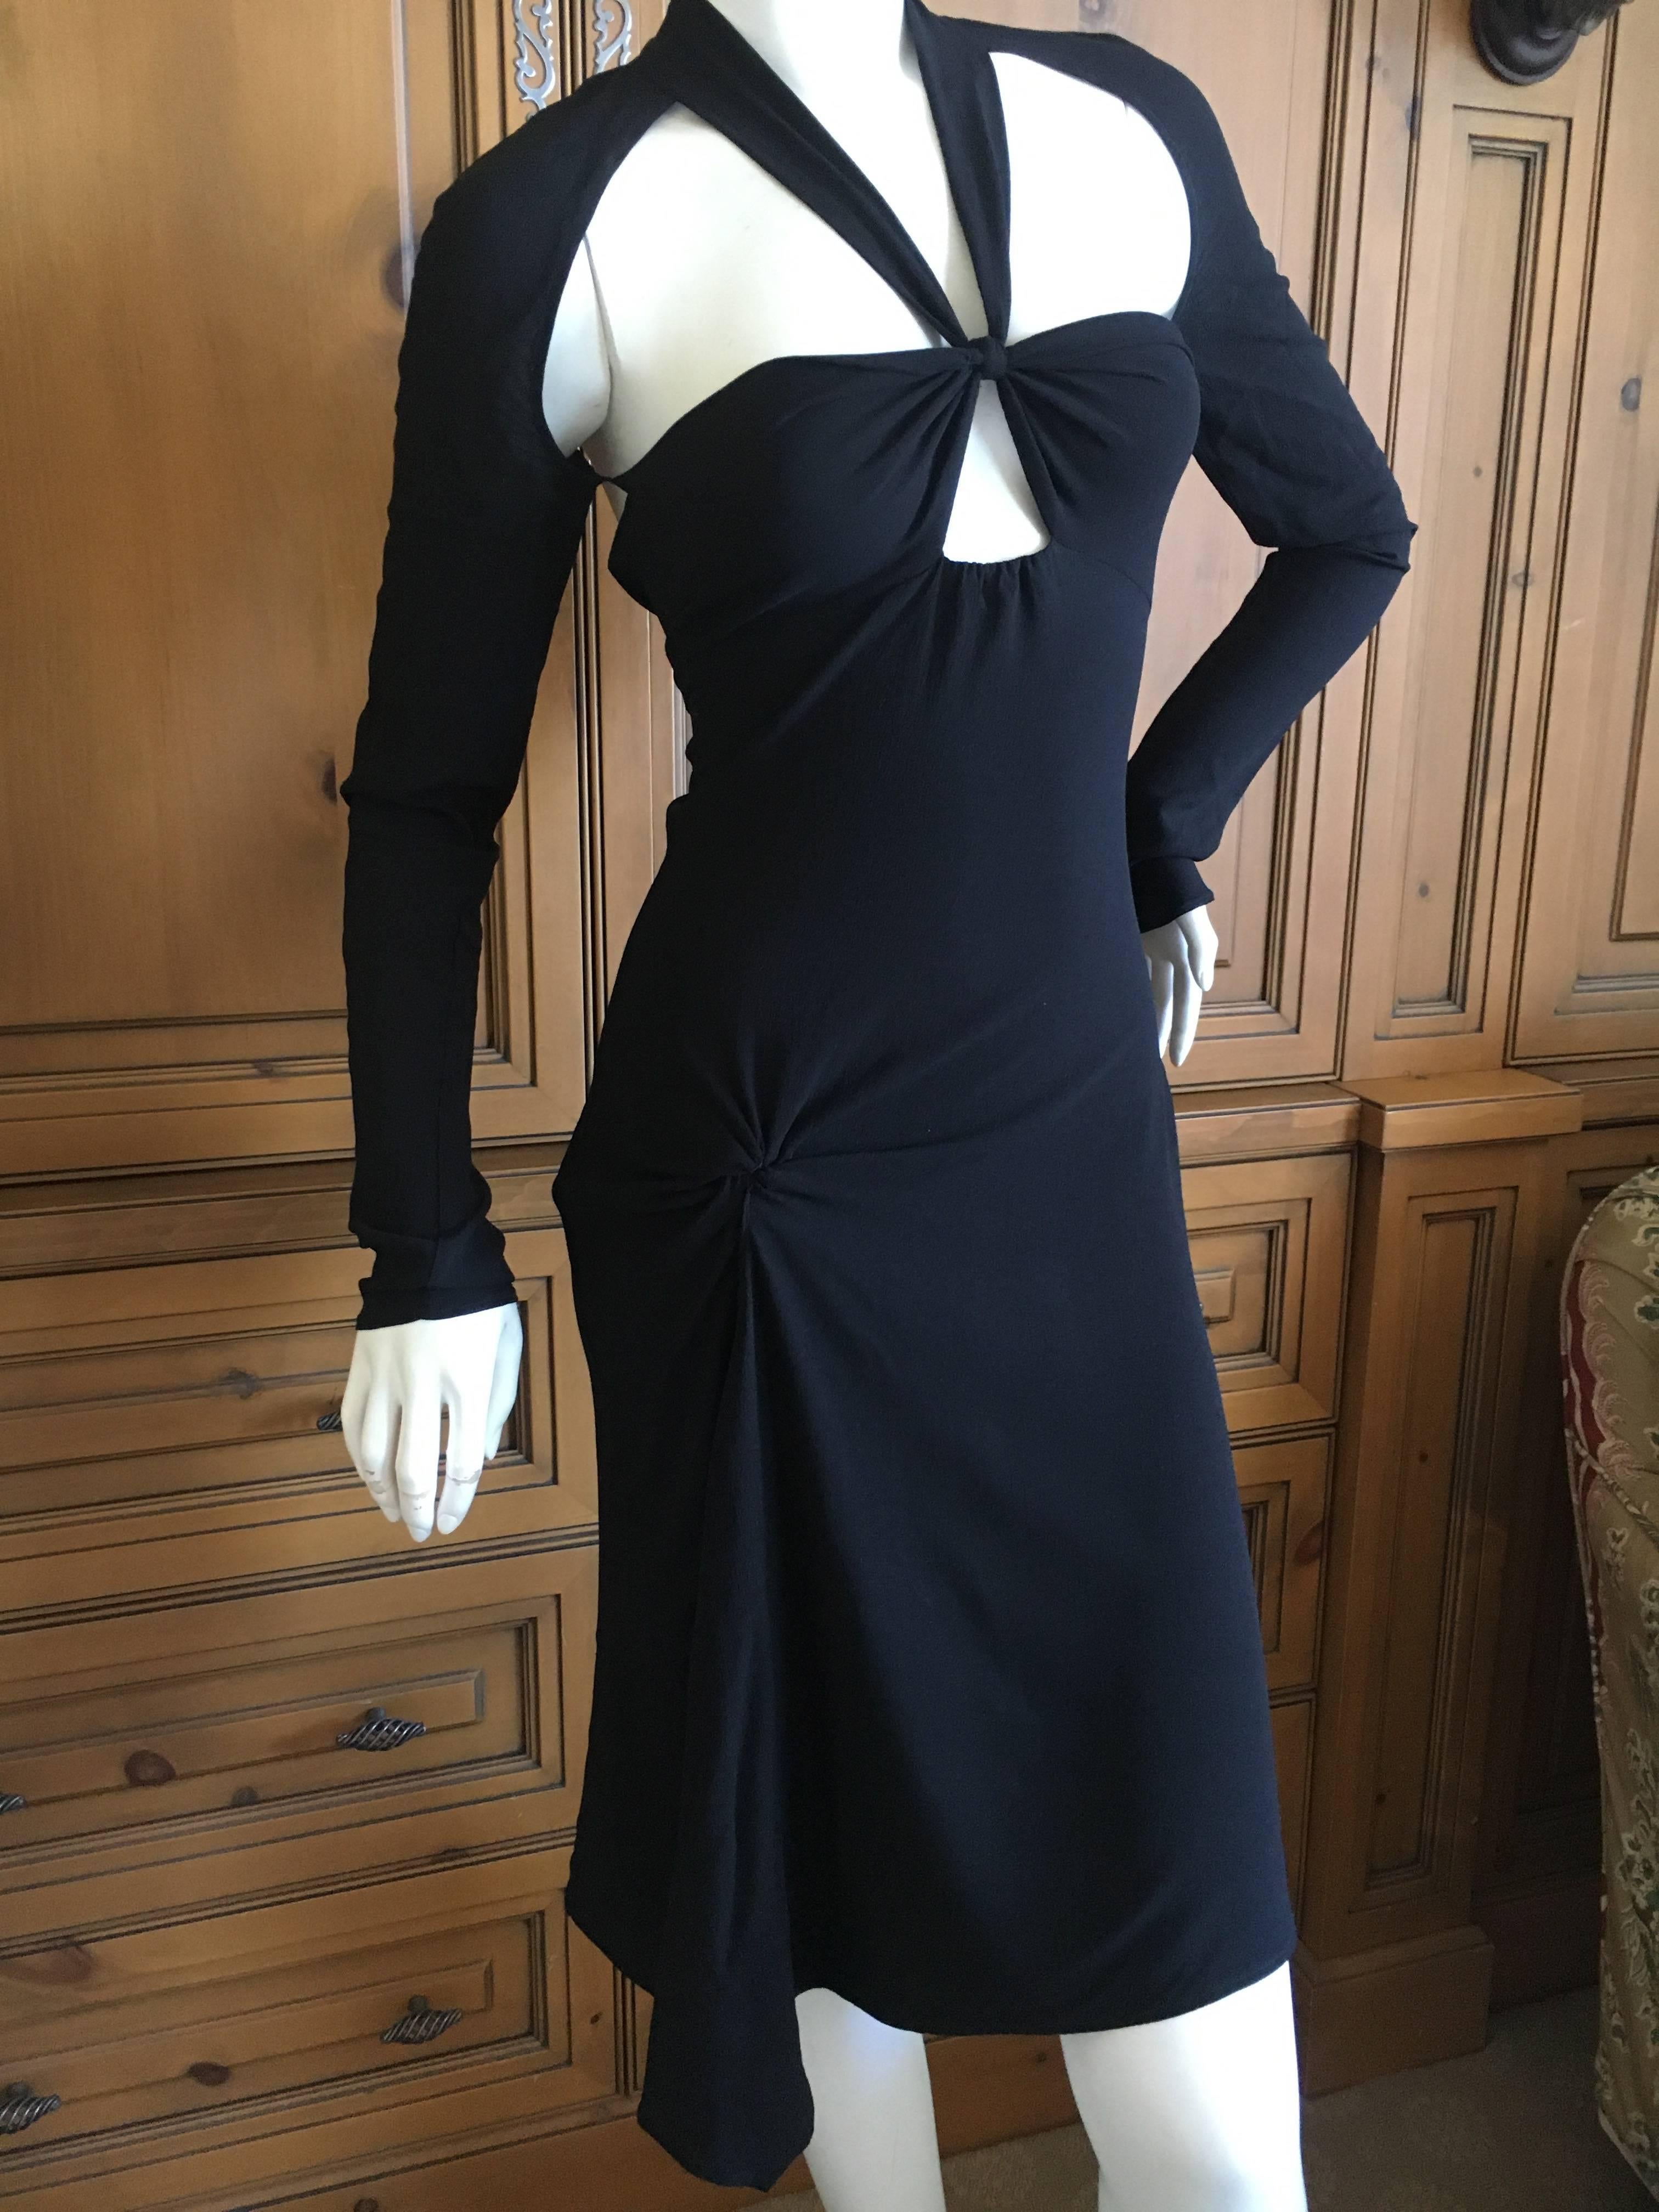 Gucci by Tom Ford Black Backless Key Hole Dress In Excellent Condition For Sale In Cloverdale, CA